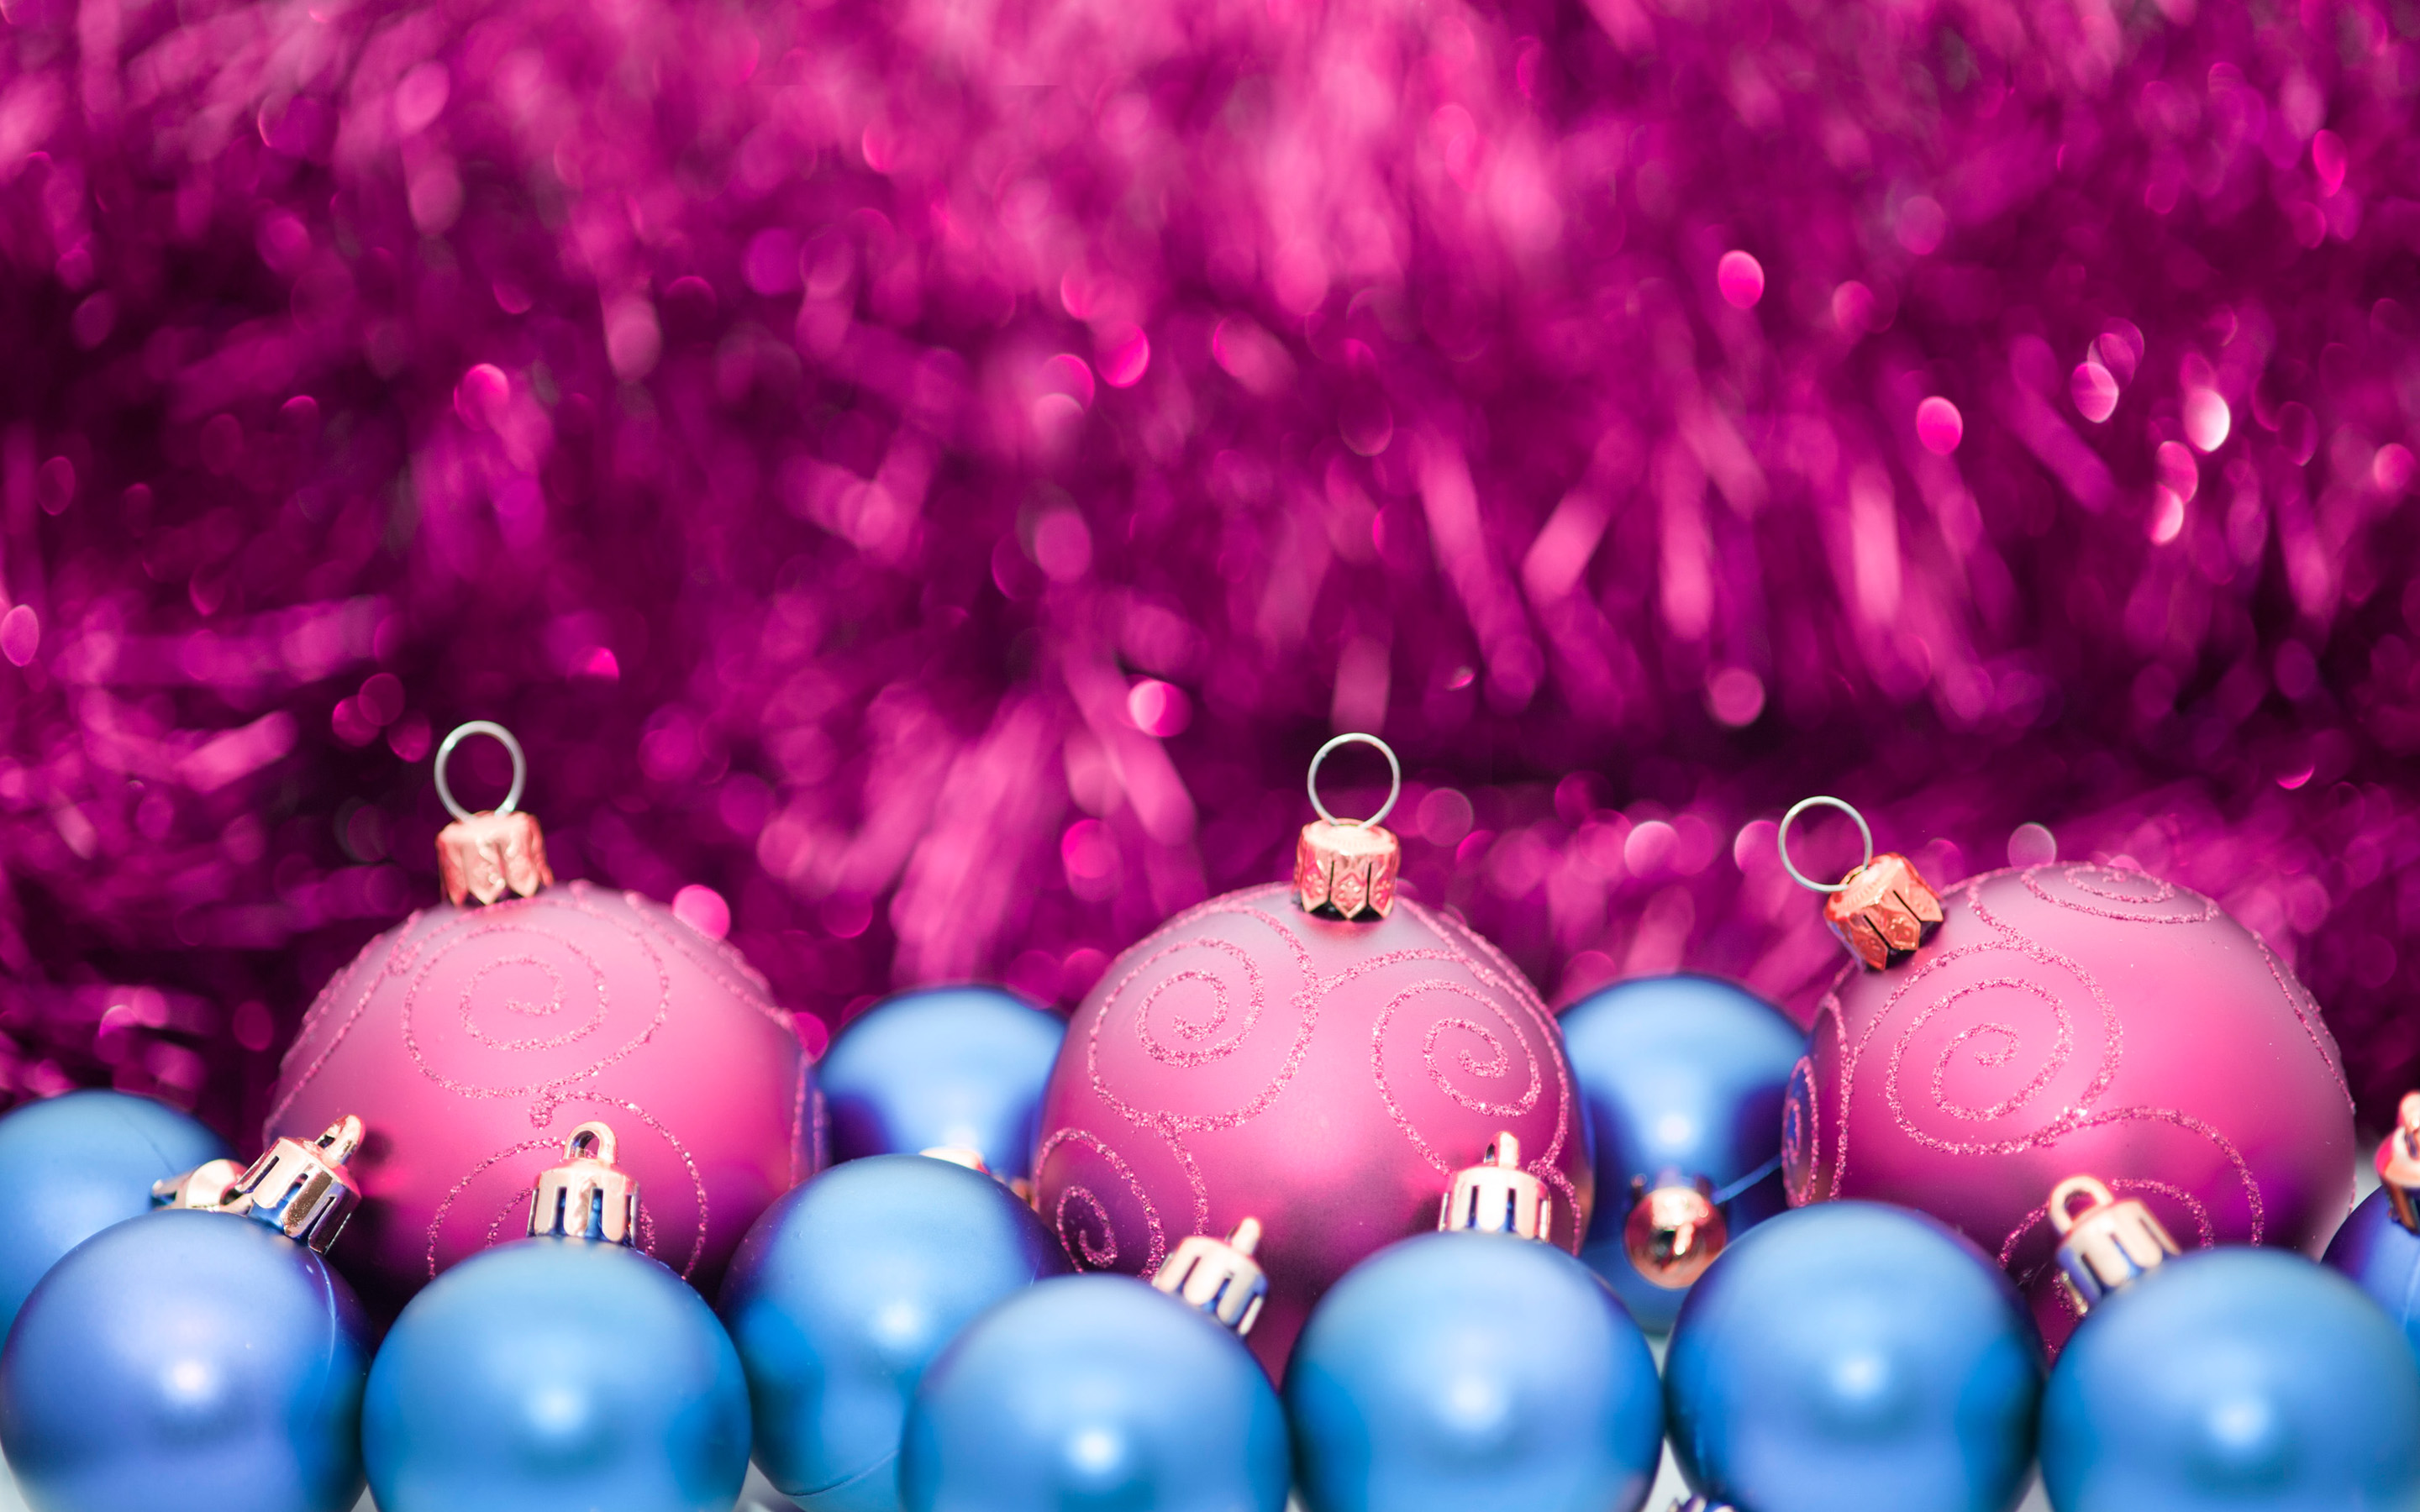 Download wallpaper Christmas decorations, 4k, christmas balls, christmas concepts, Happy New Year, xmas balls for desktop with resolution 2880x1800. High Quality HD picture wallpaper